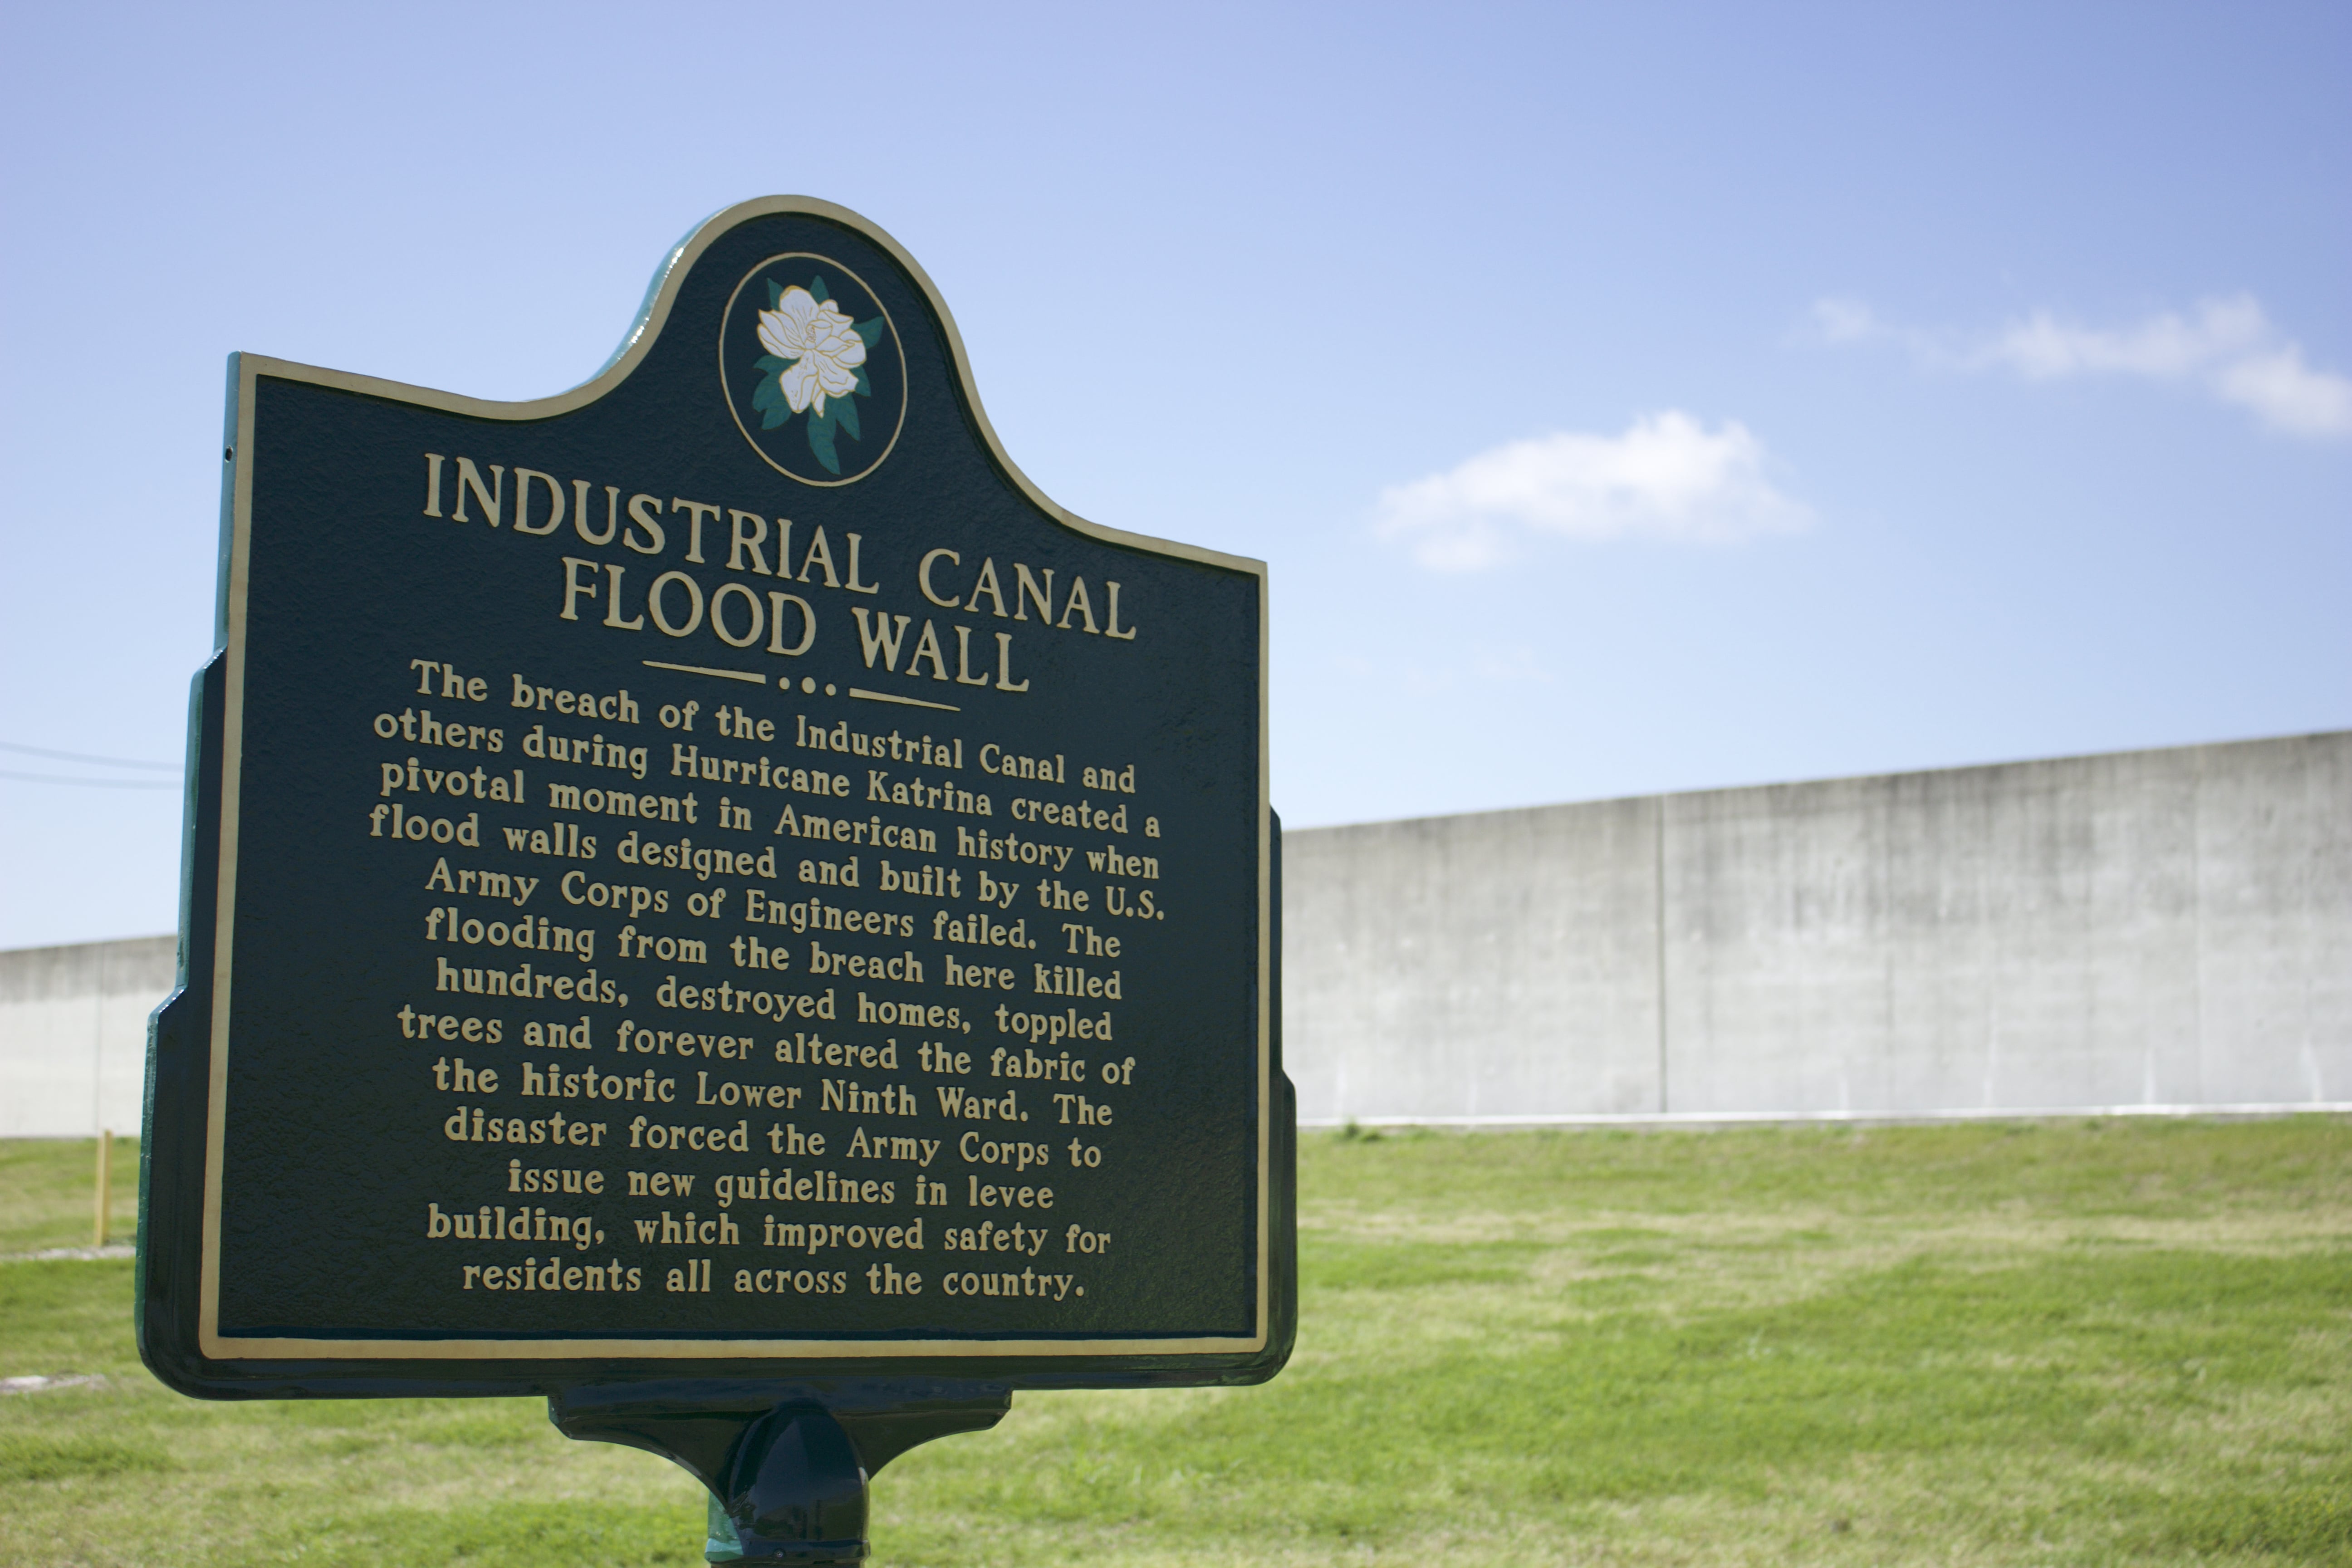 A Louisiana State historic plaque is displayed at the site of the Industrial Canal breach in New Orleans during Hurricane Katrina. The breach was especially devastating for the Lower Ninth Ward, decimating the primarily lower income community.